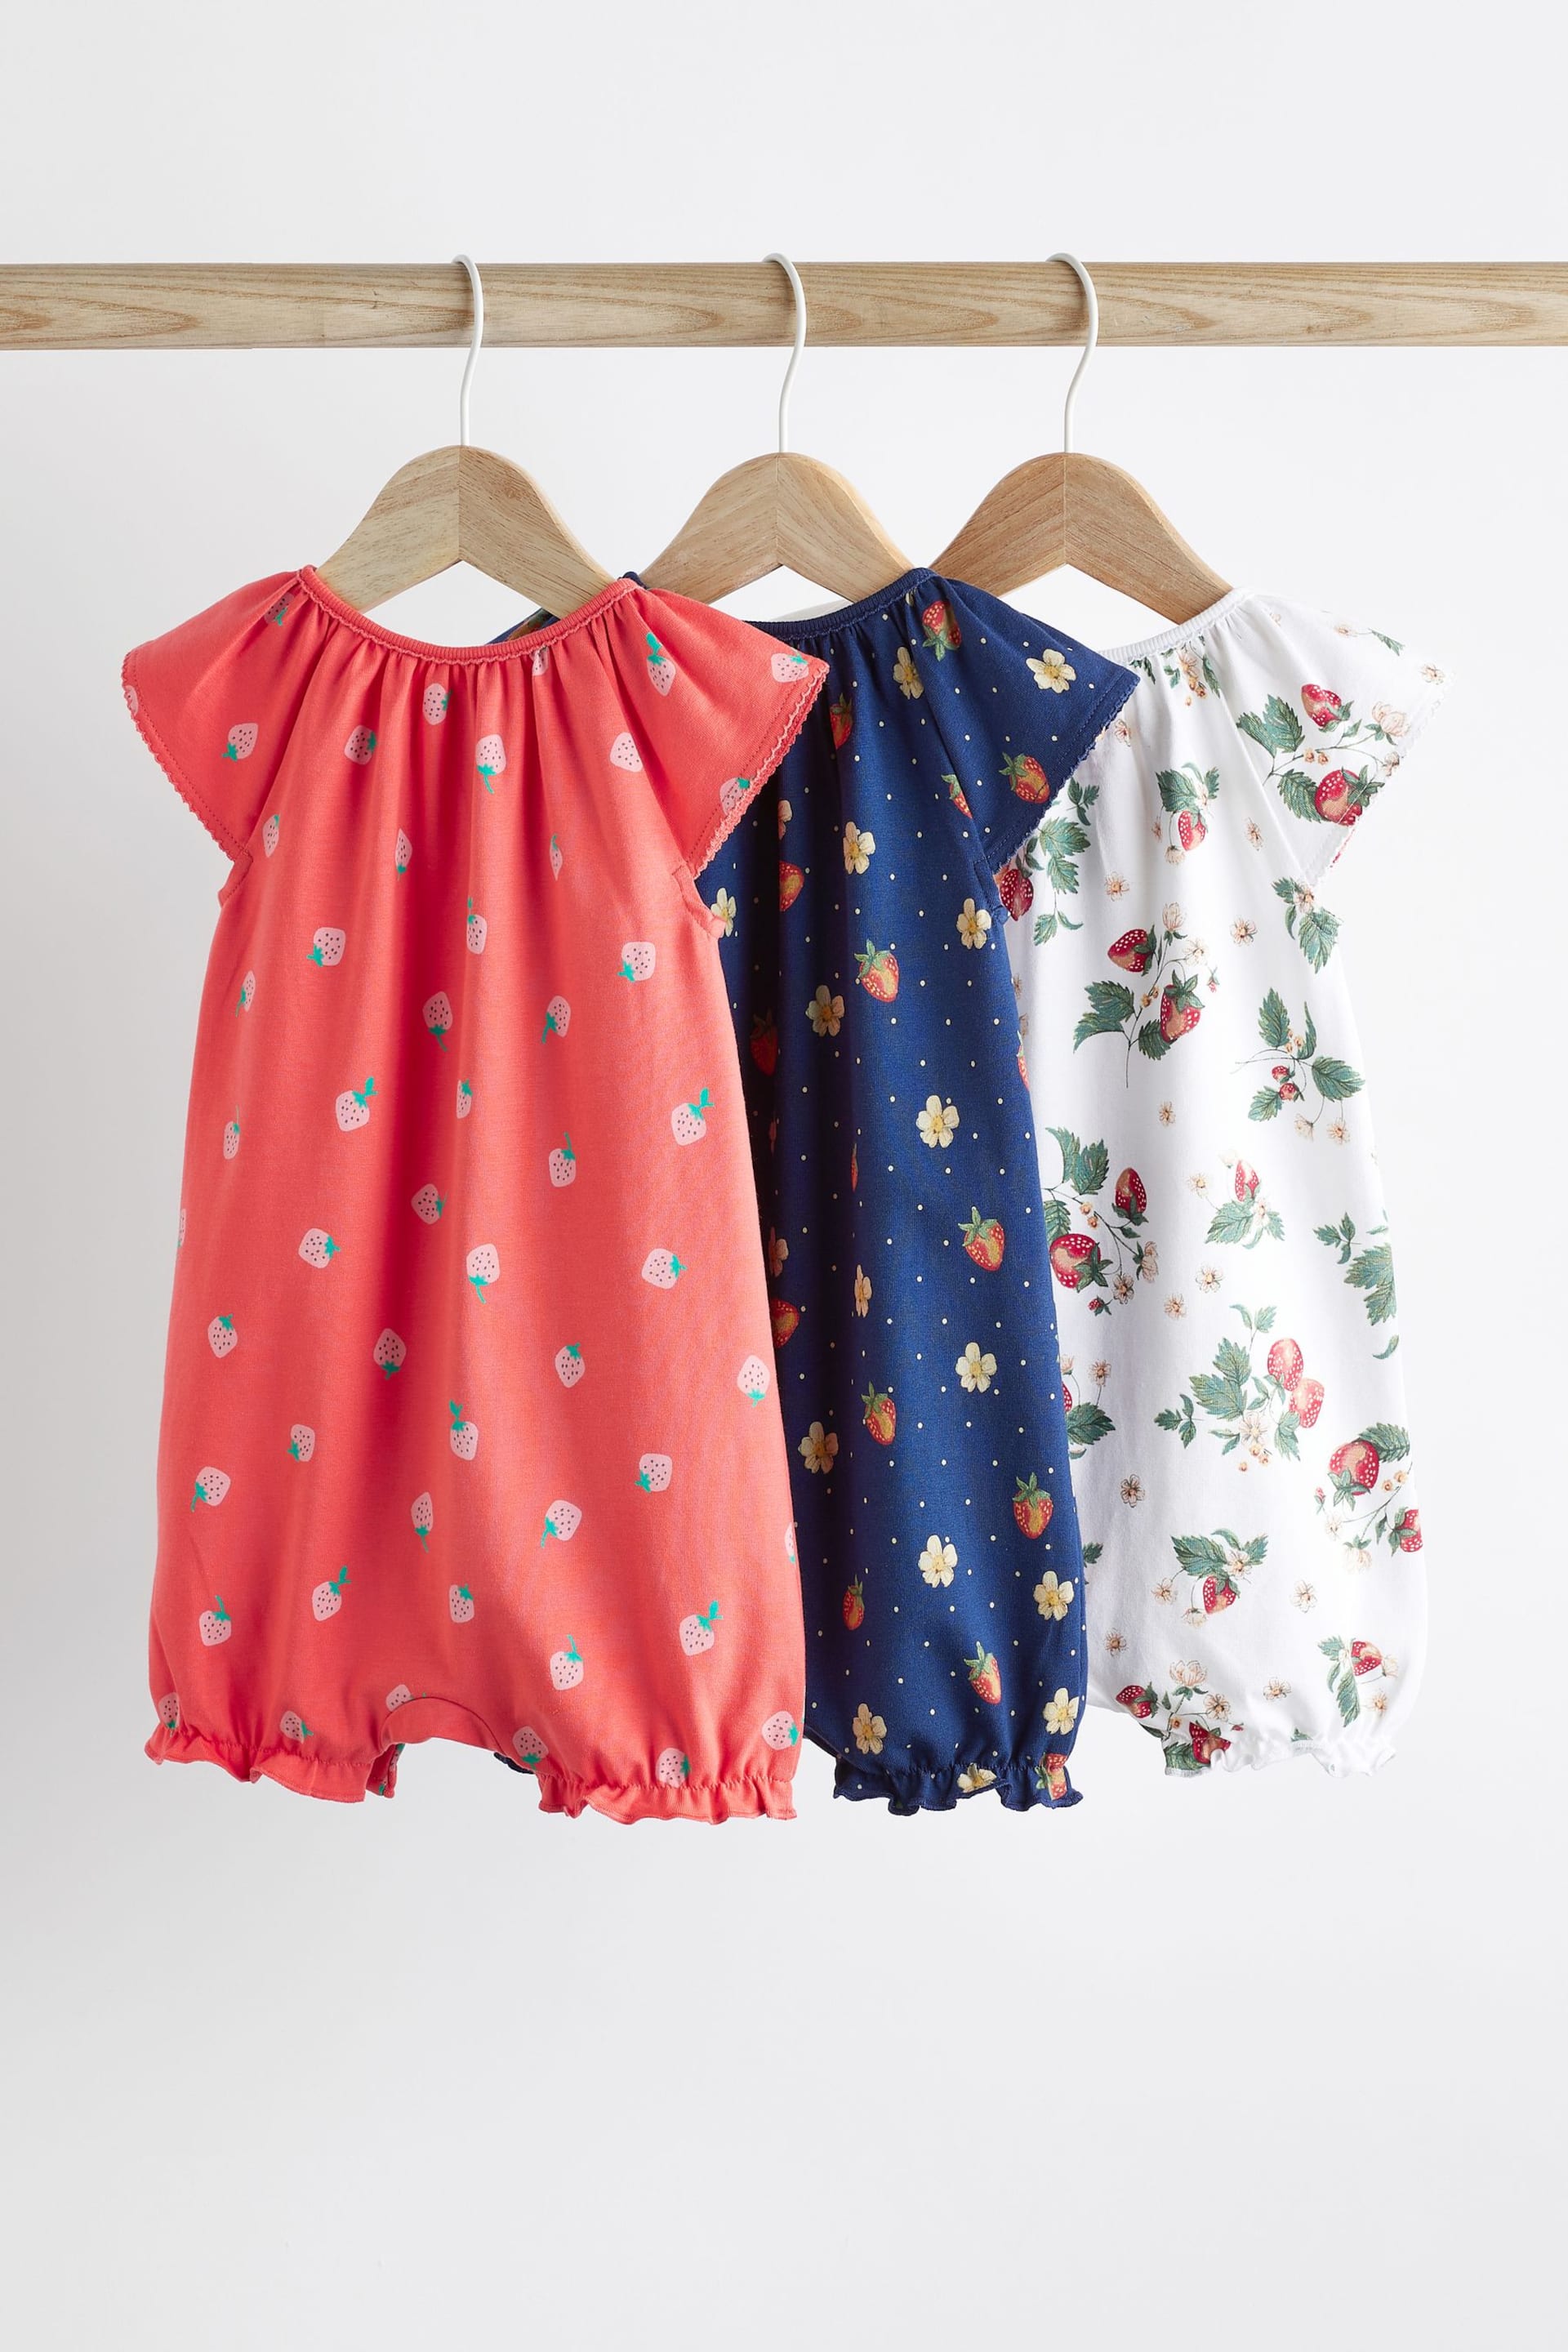 White/Blue/Red Strawberry Baby Rompers 3 Pack - Image 2 of 9